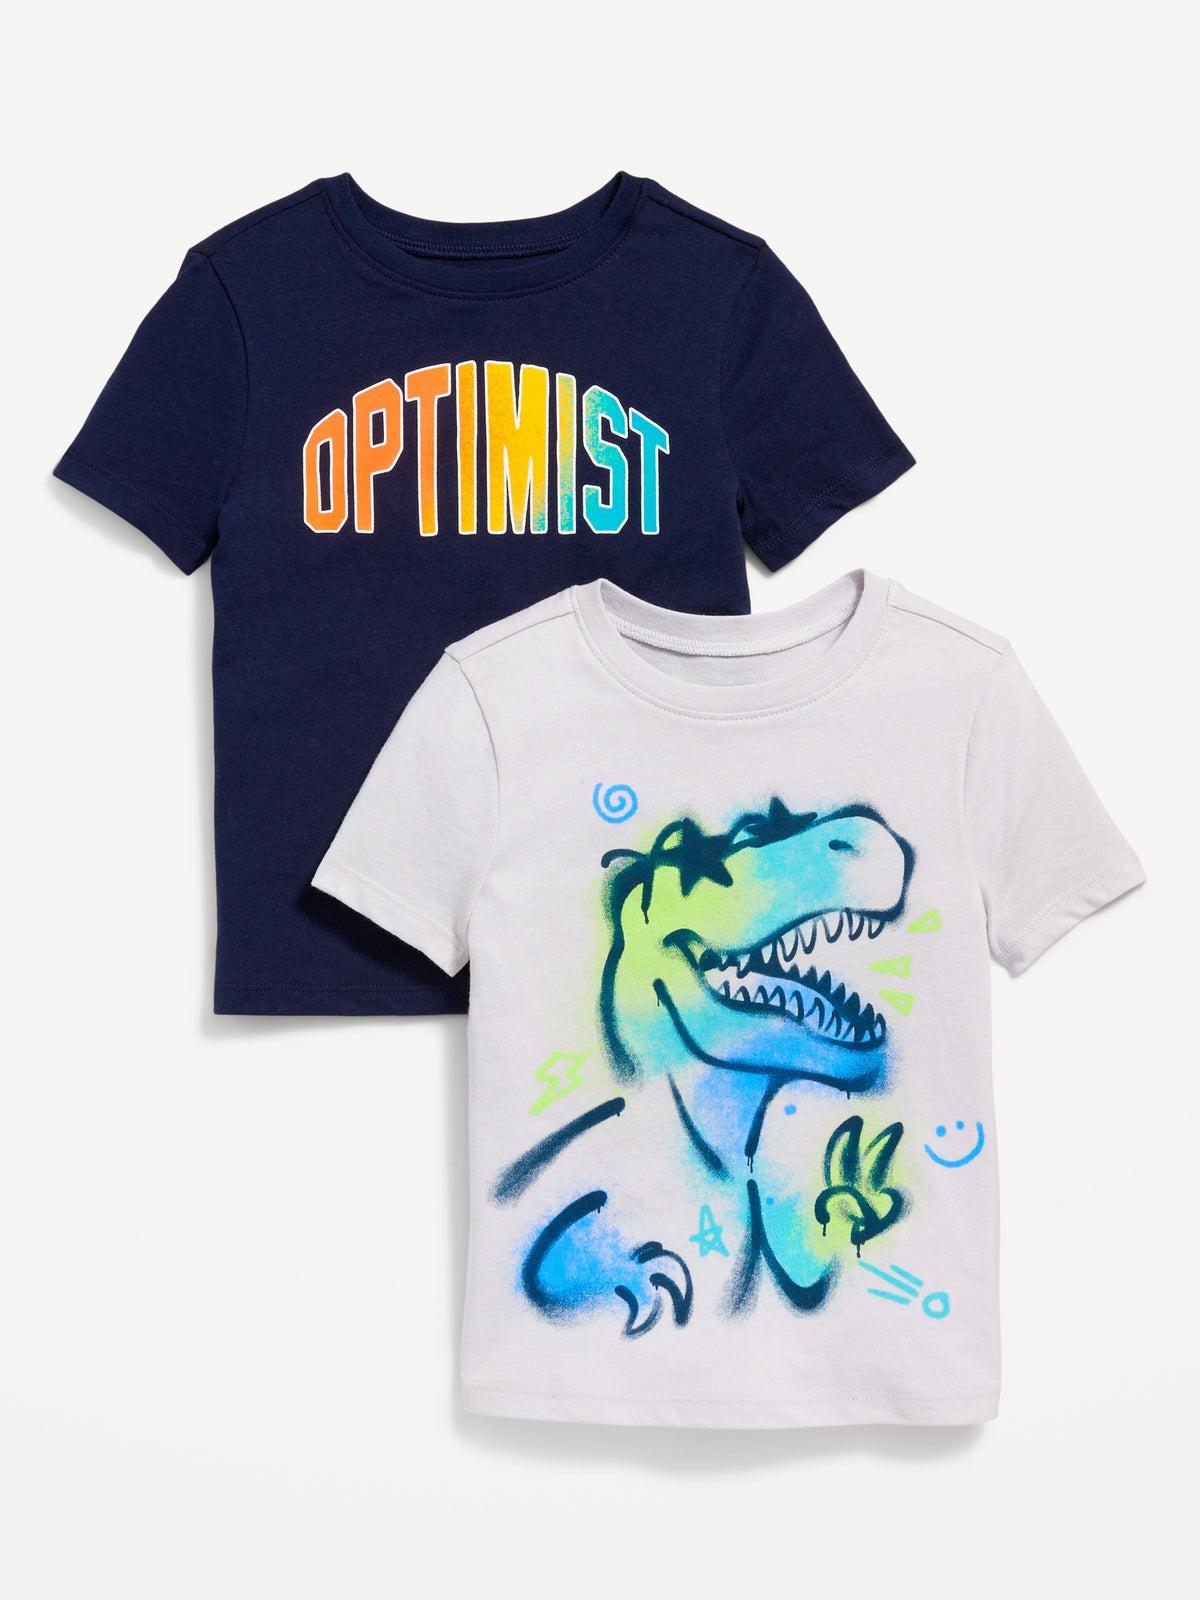 Unisex Graphic T-Shirt 2-Pack for Toddler